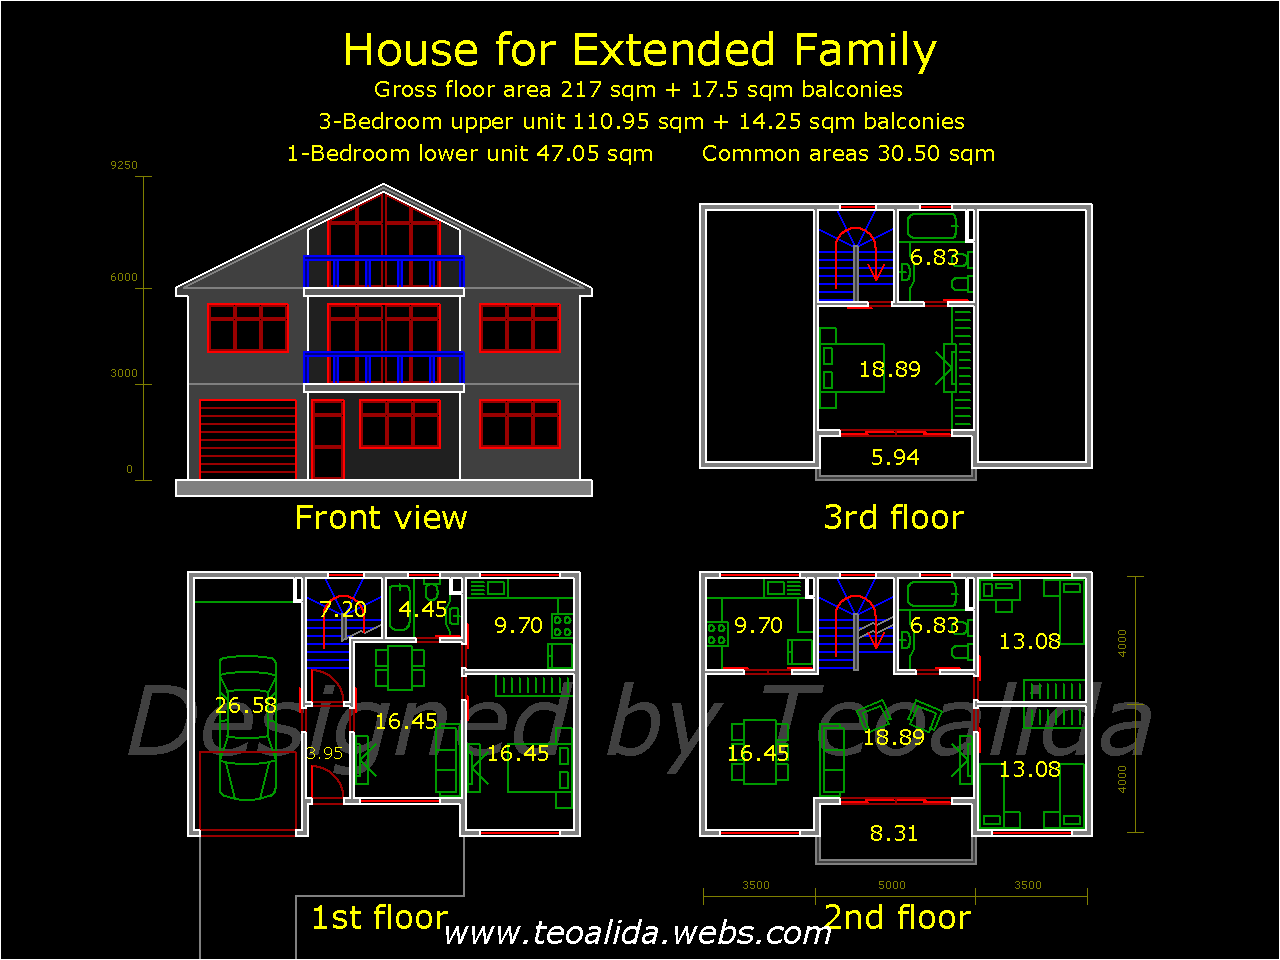 House floor plans 50-400 sqm designed by me - The world of ...